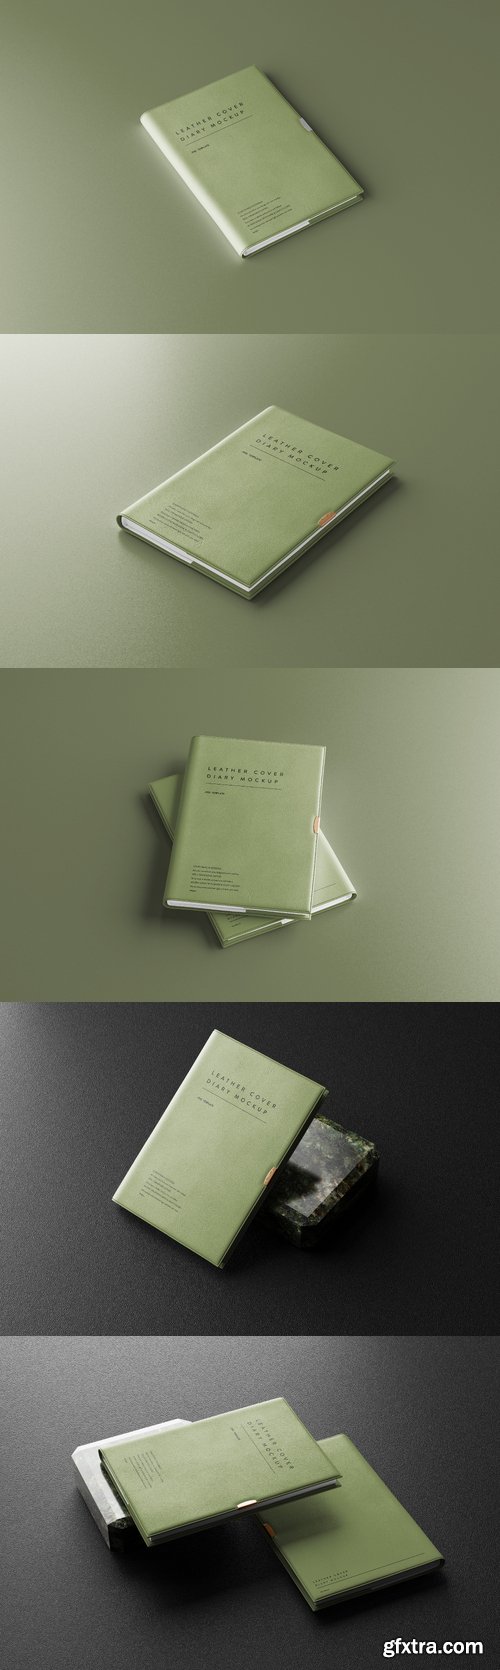 Leather cover diary mockup